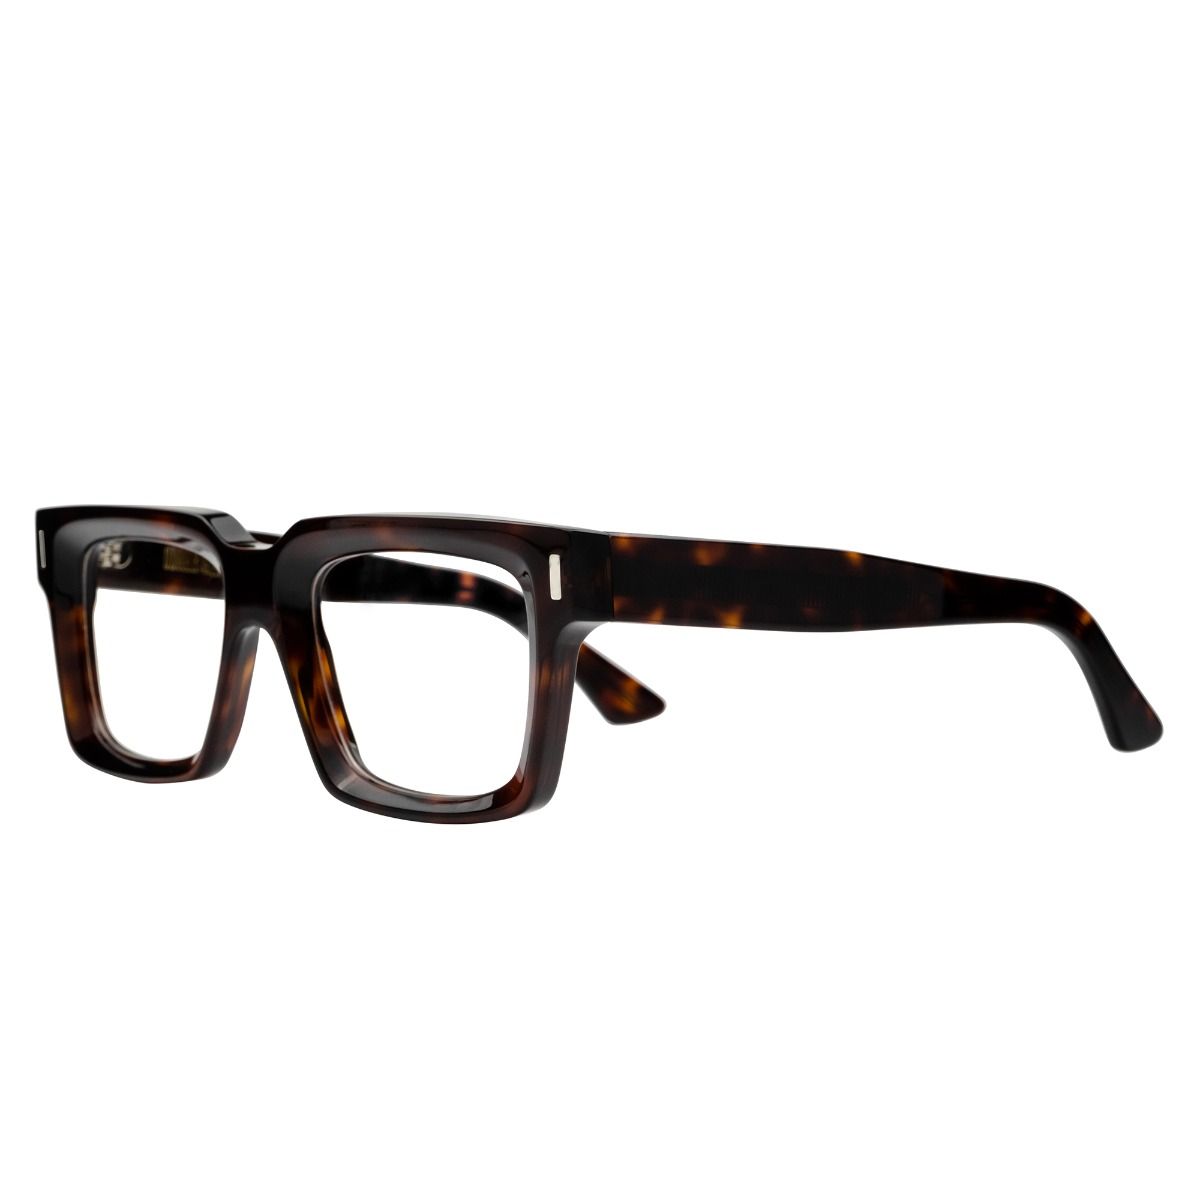 1386 Optical Square Glasses - Dark Turtle by Cutler and Gross